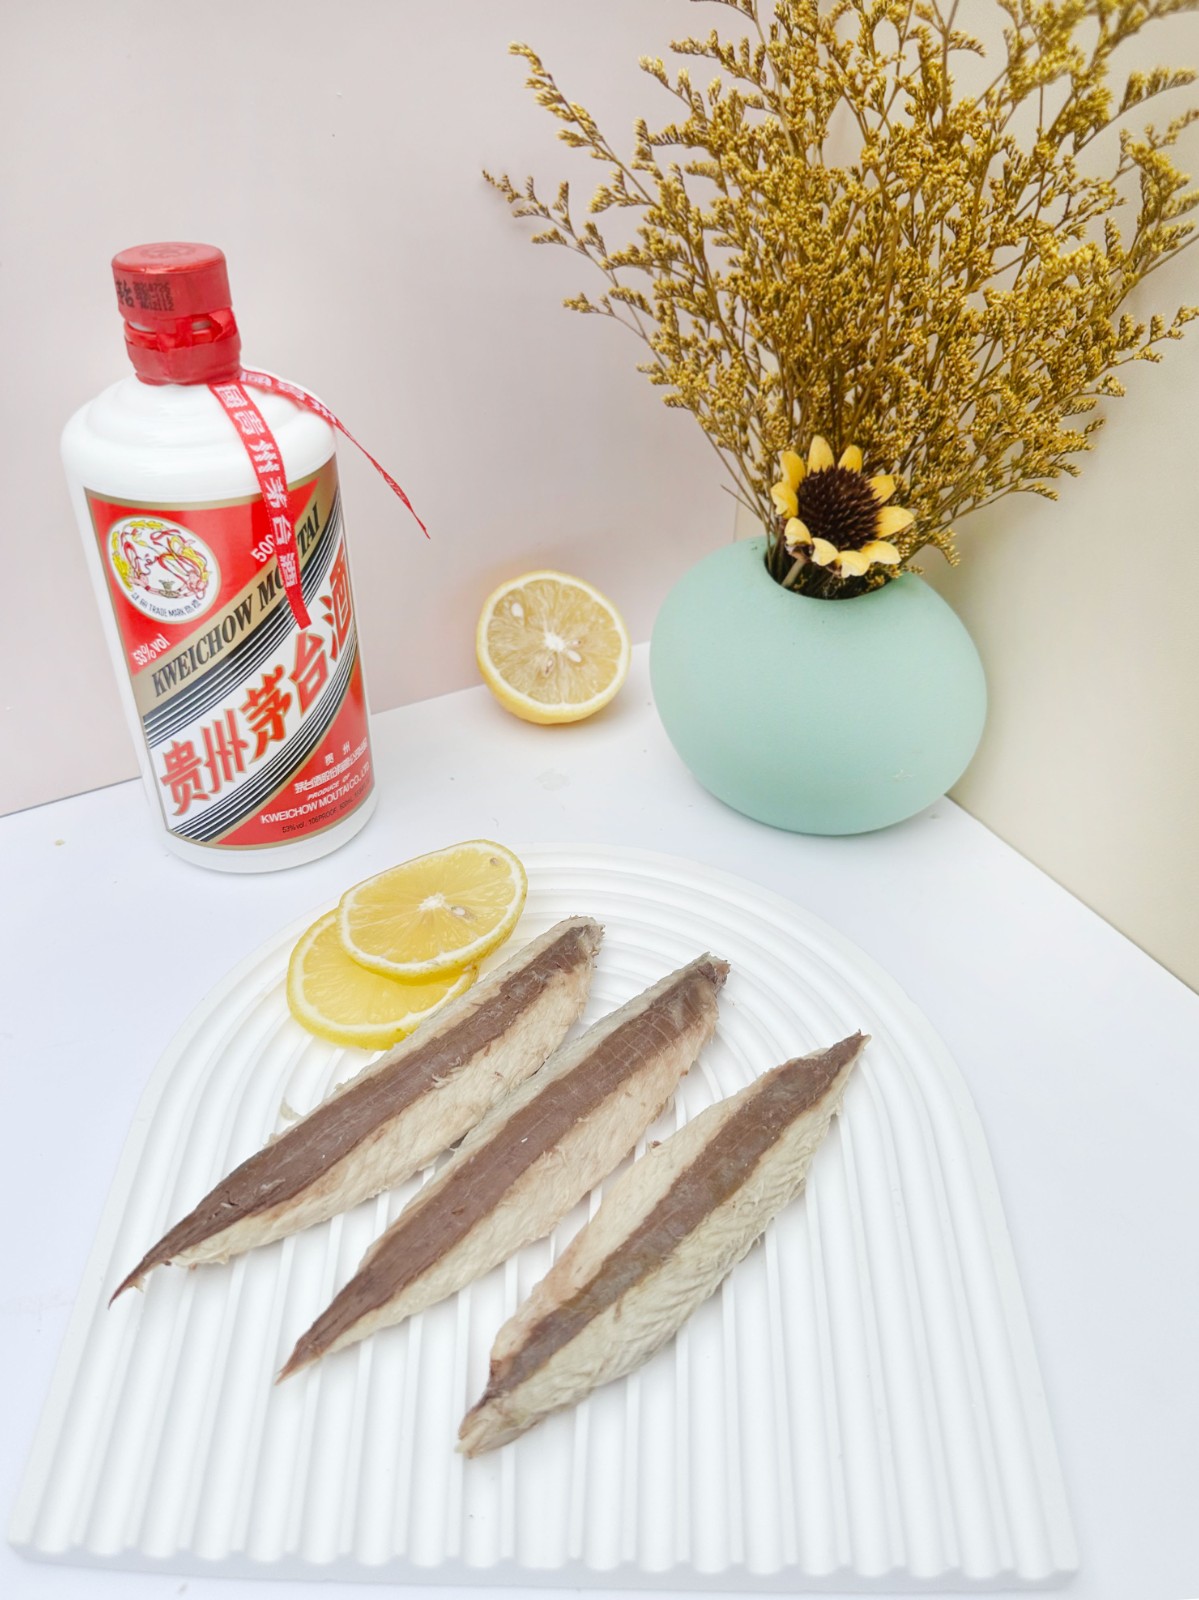 Precooked pacific
mackerel (scomber
scombrus)fillets，
red meat on